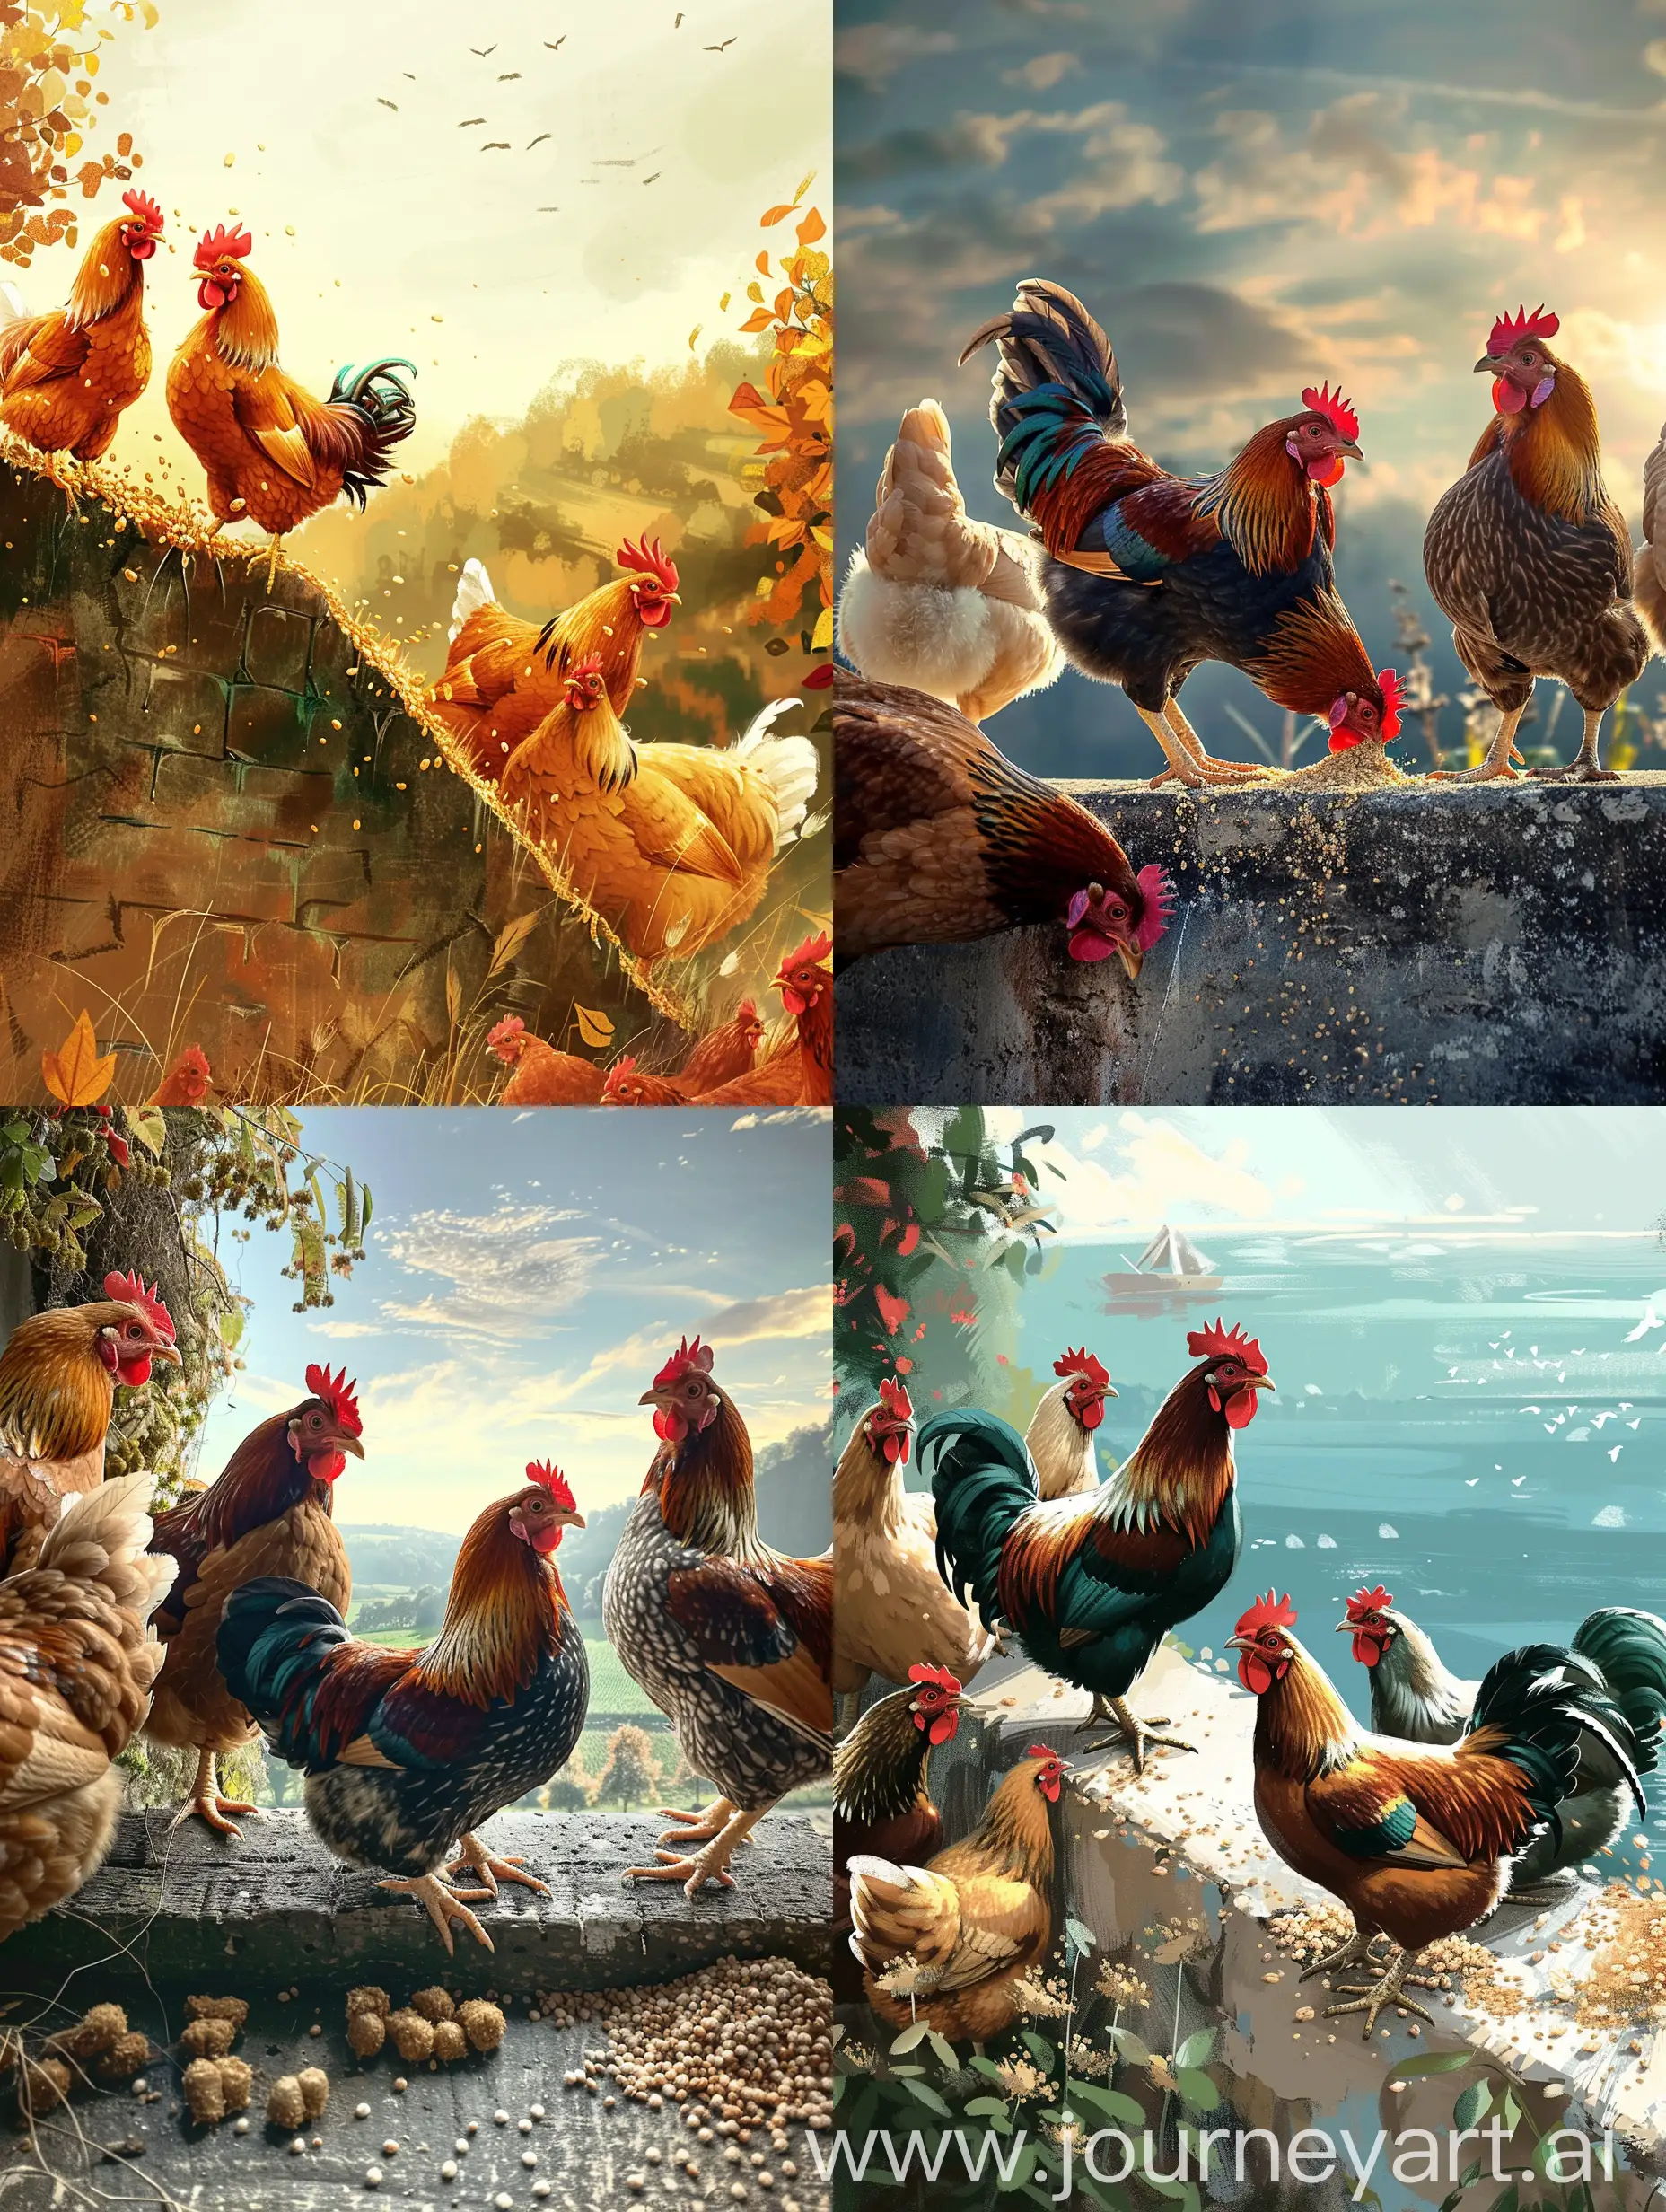 Sunny-Day-Farm-Scene-with-Chicken-Eating-Grain-on-Wall